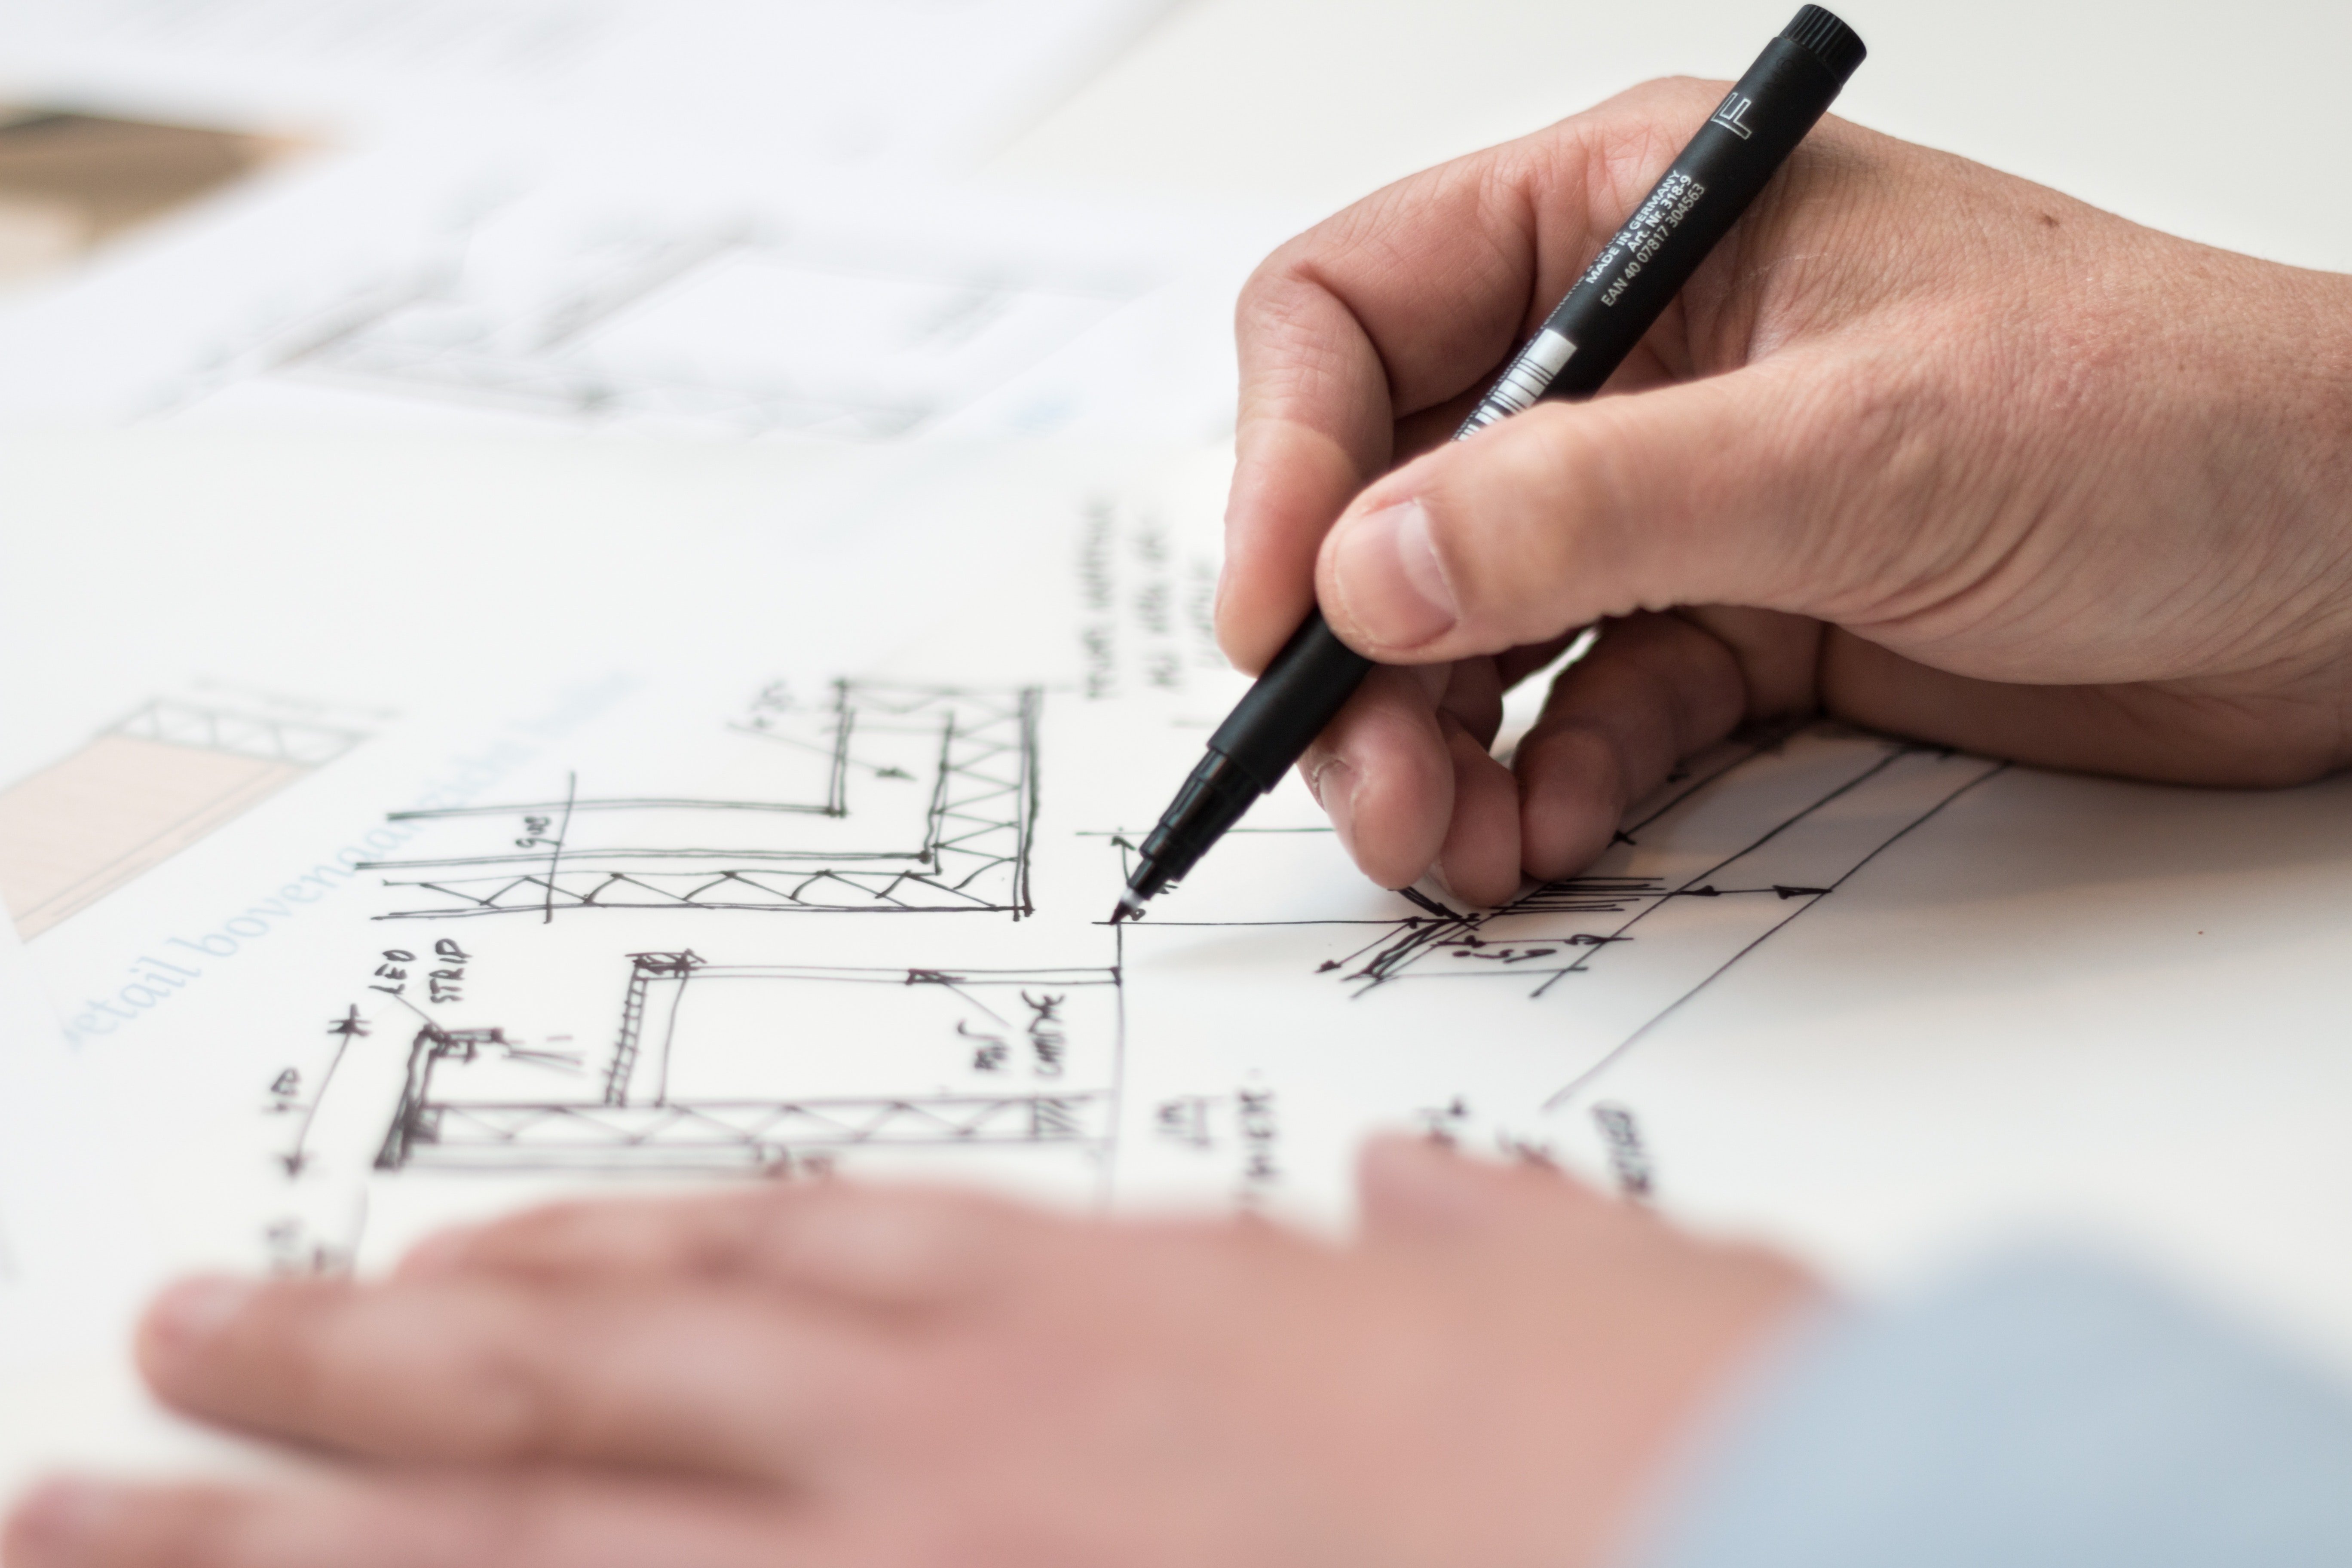 Pictured - An individual with a black pen designing a structure | Source: Pexels 